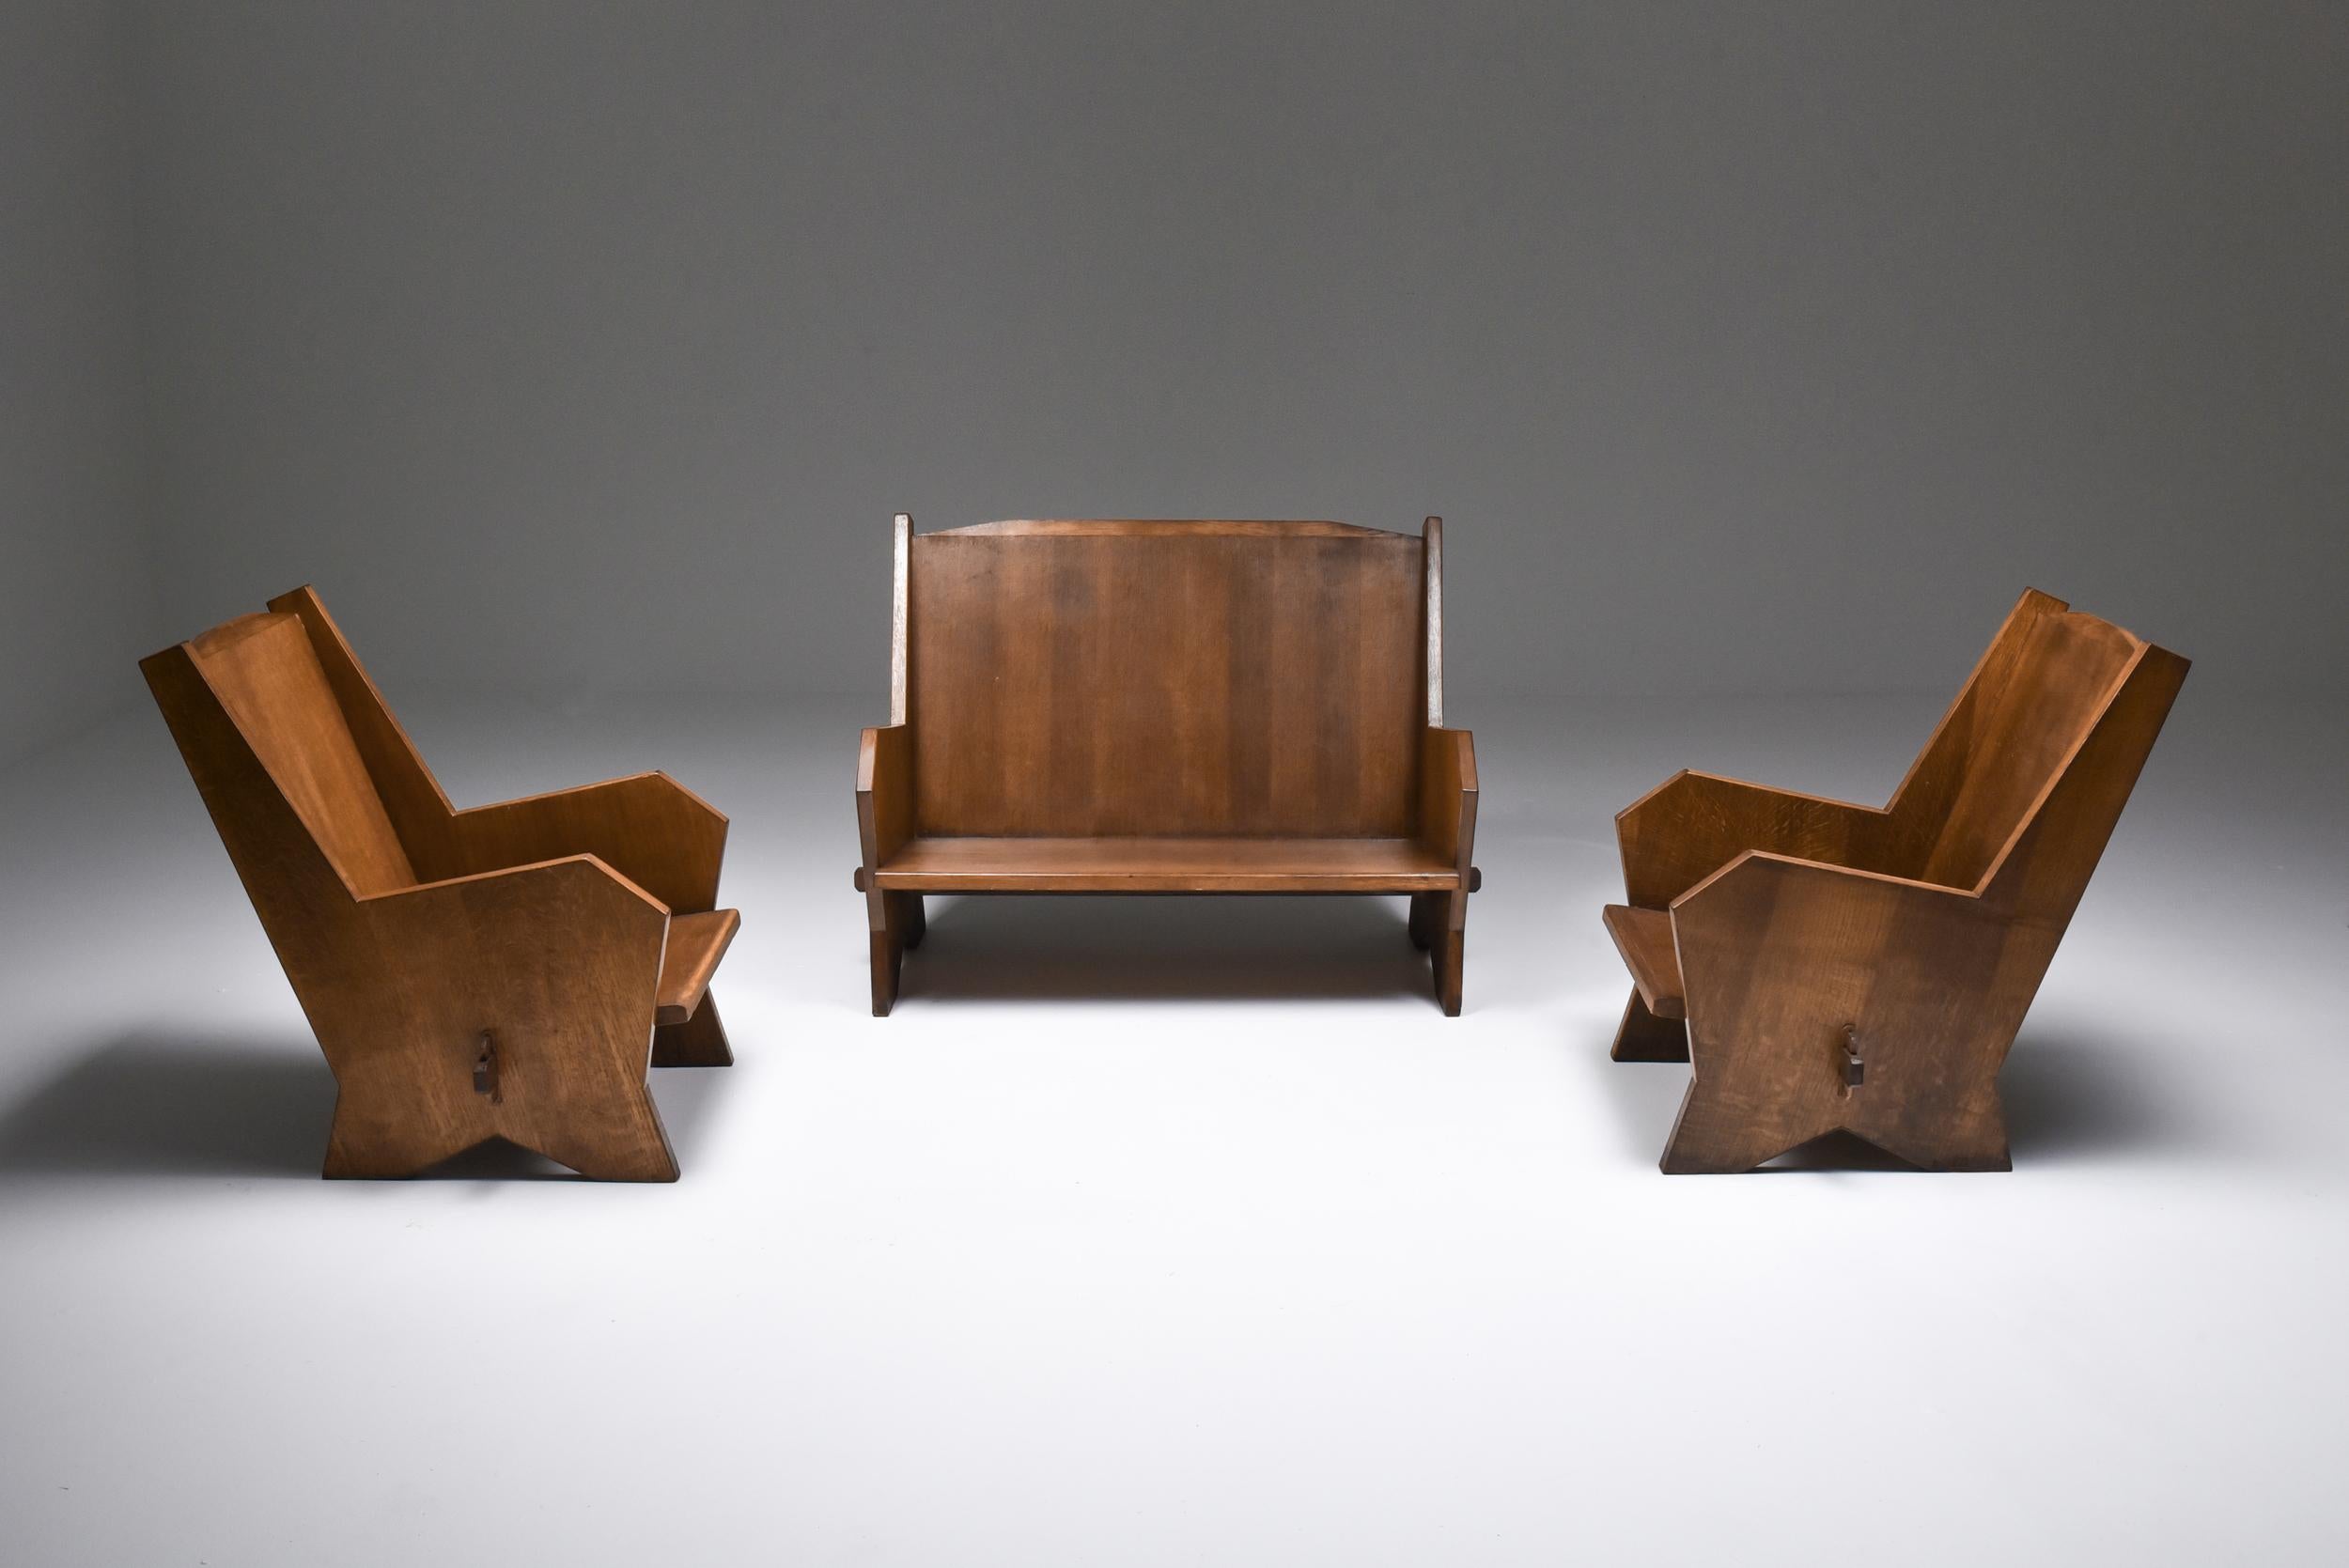 Italian Settee in Stained Beech, 1940s For Sale 5